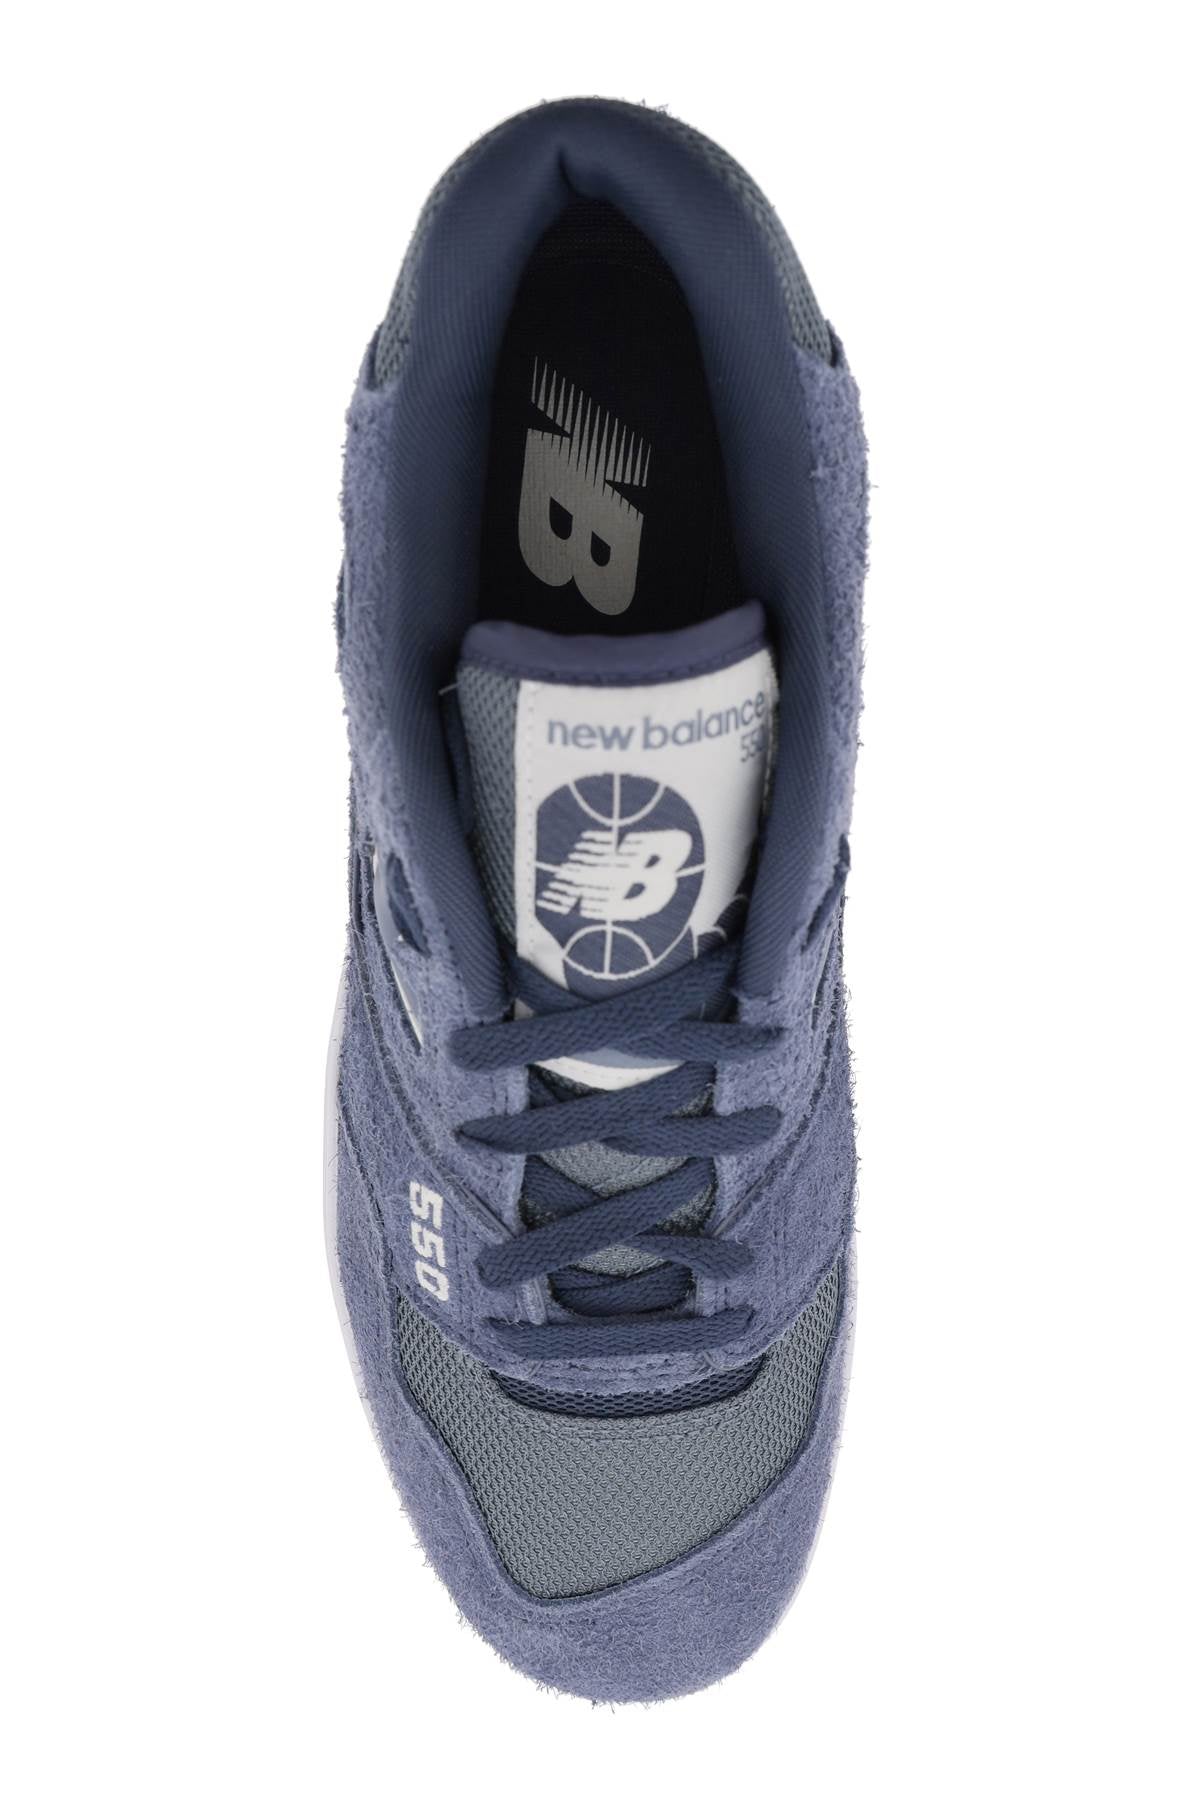 New balance 550 sneakers-1